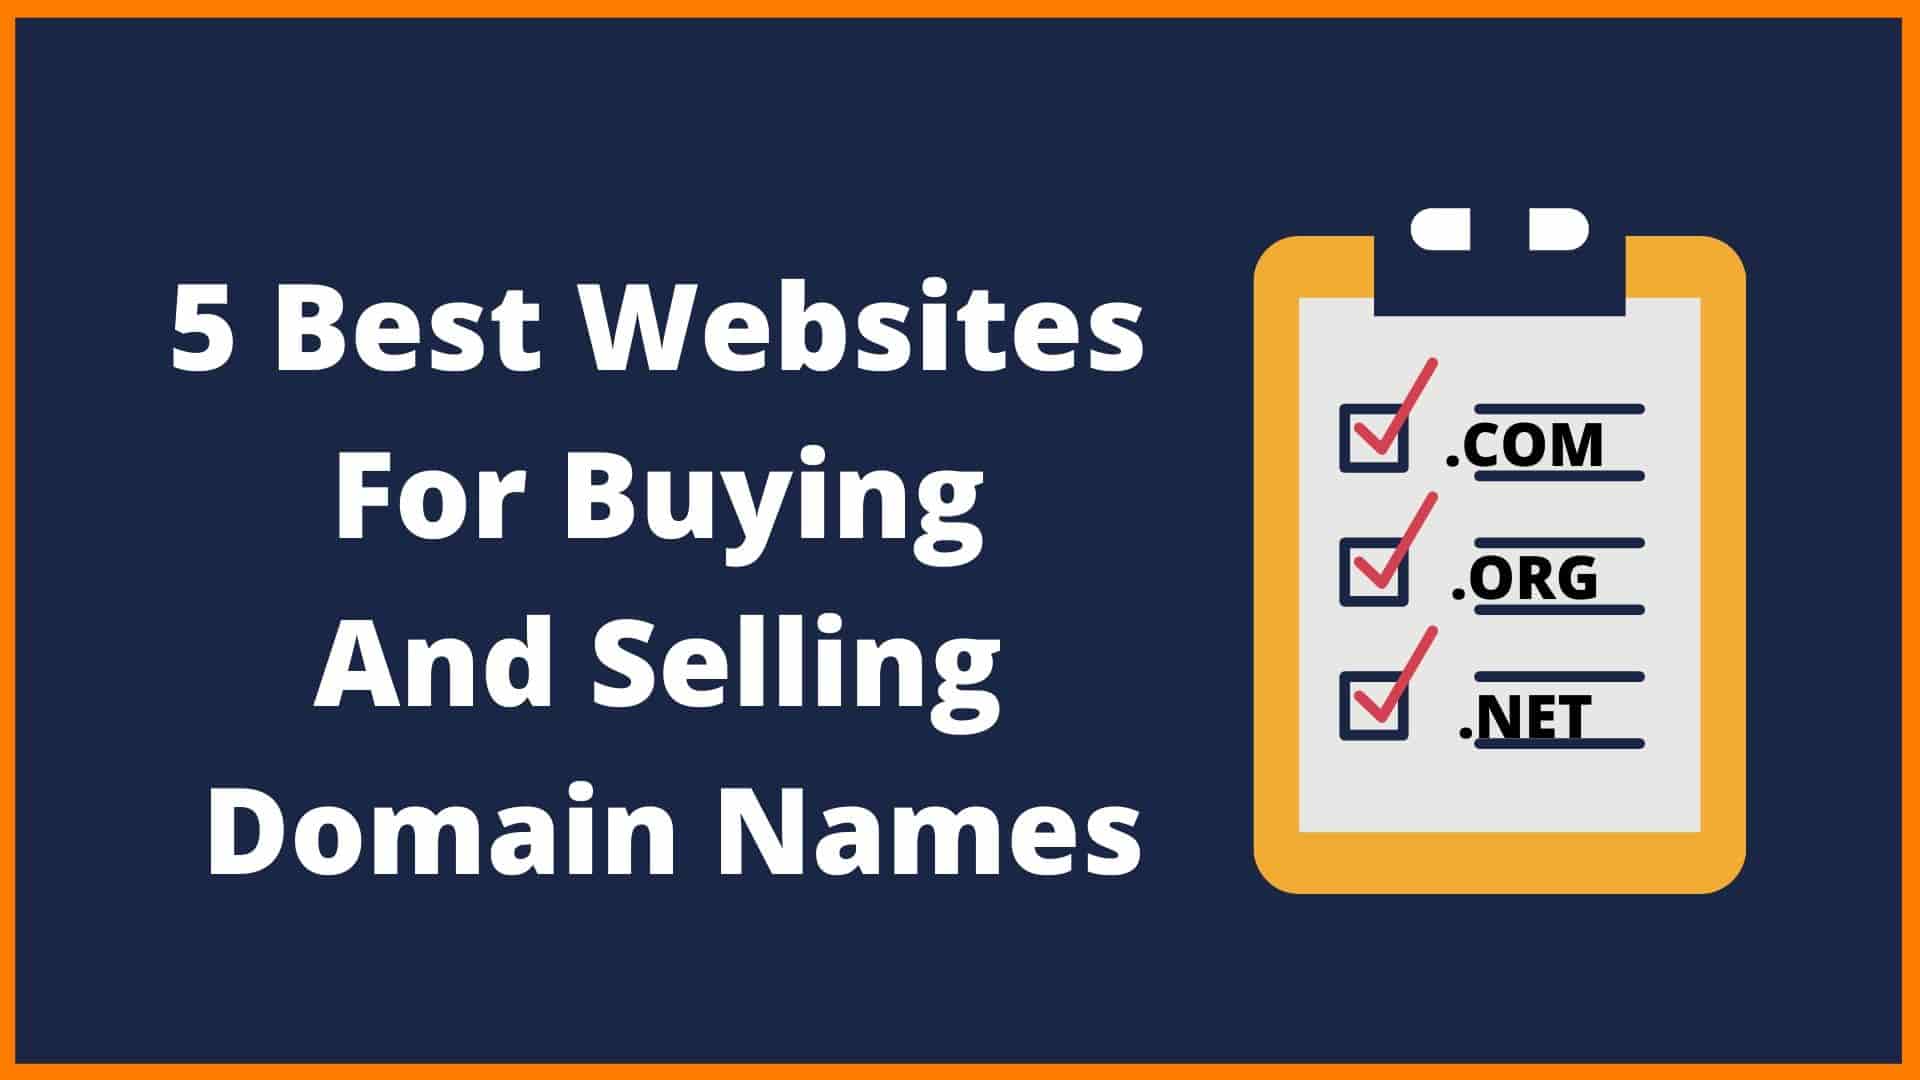 5 Best Websites For Buying And Selling Domain Names